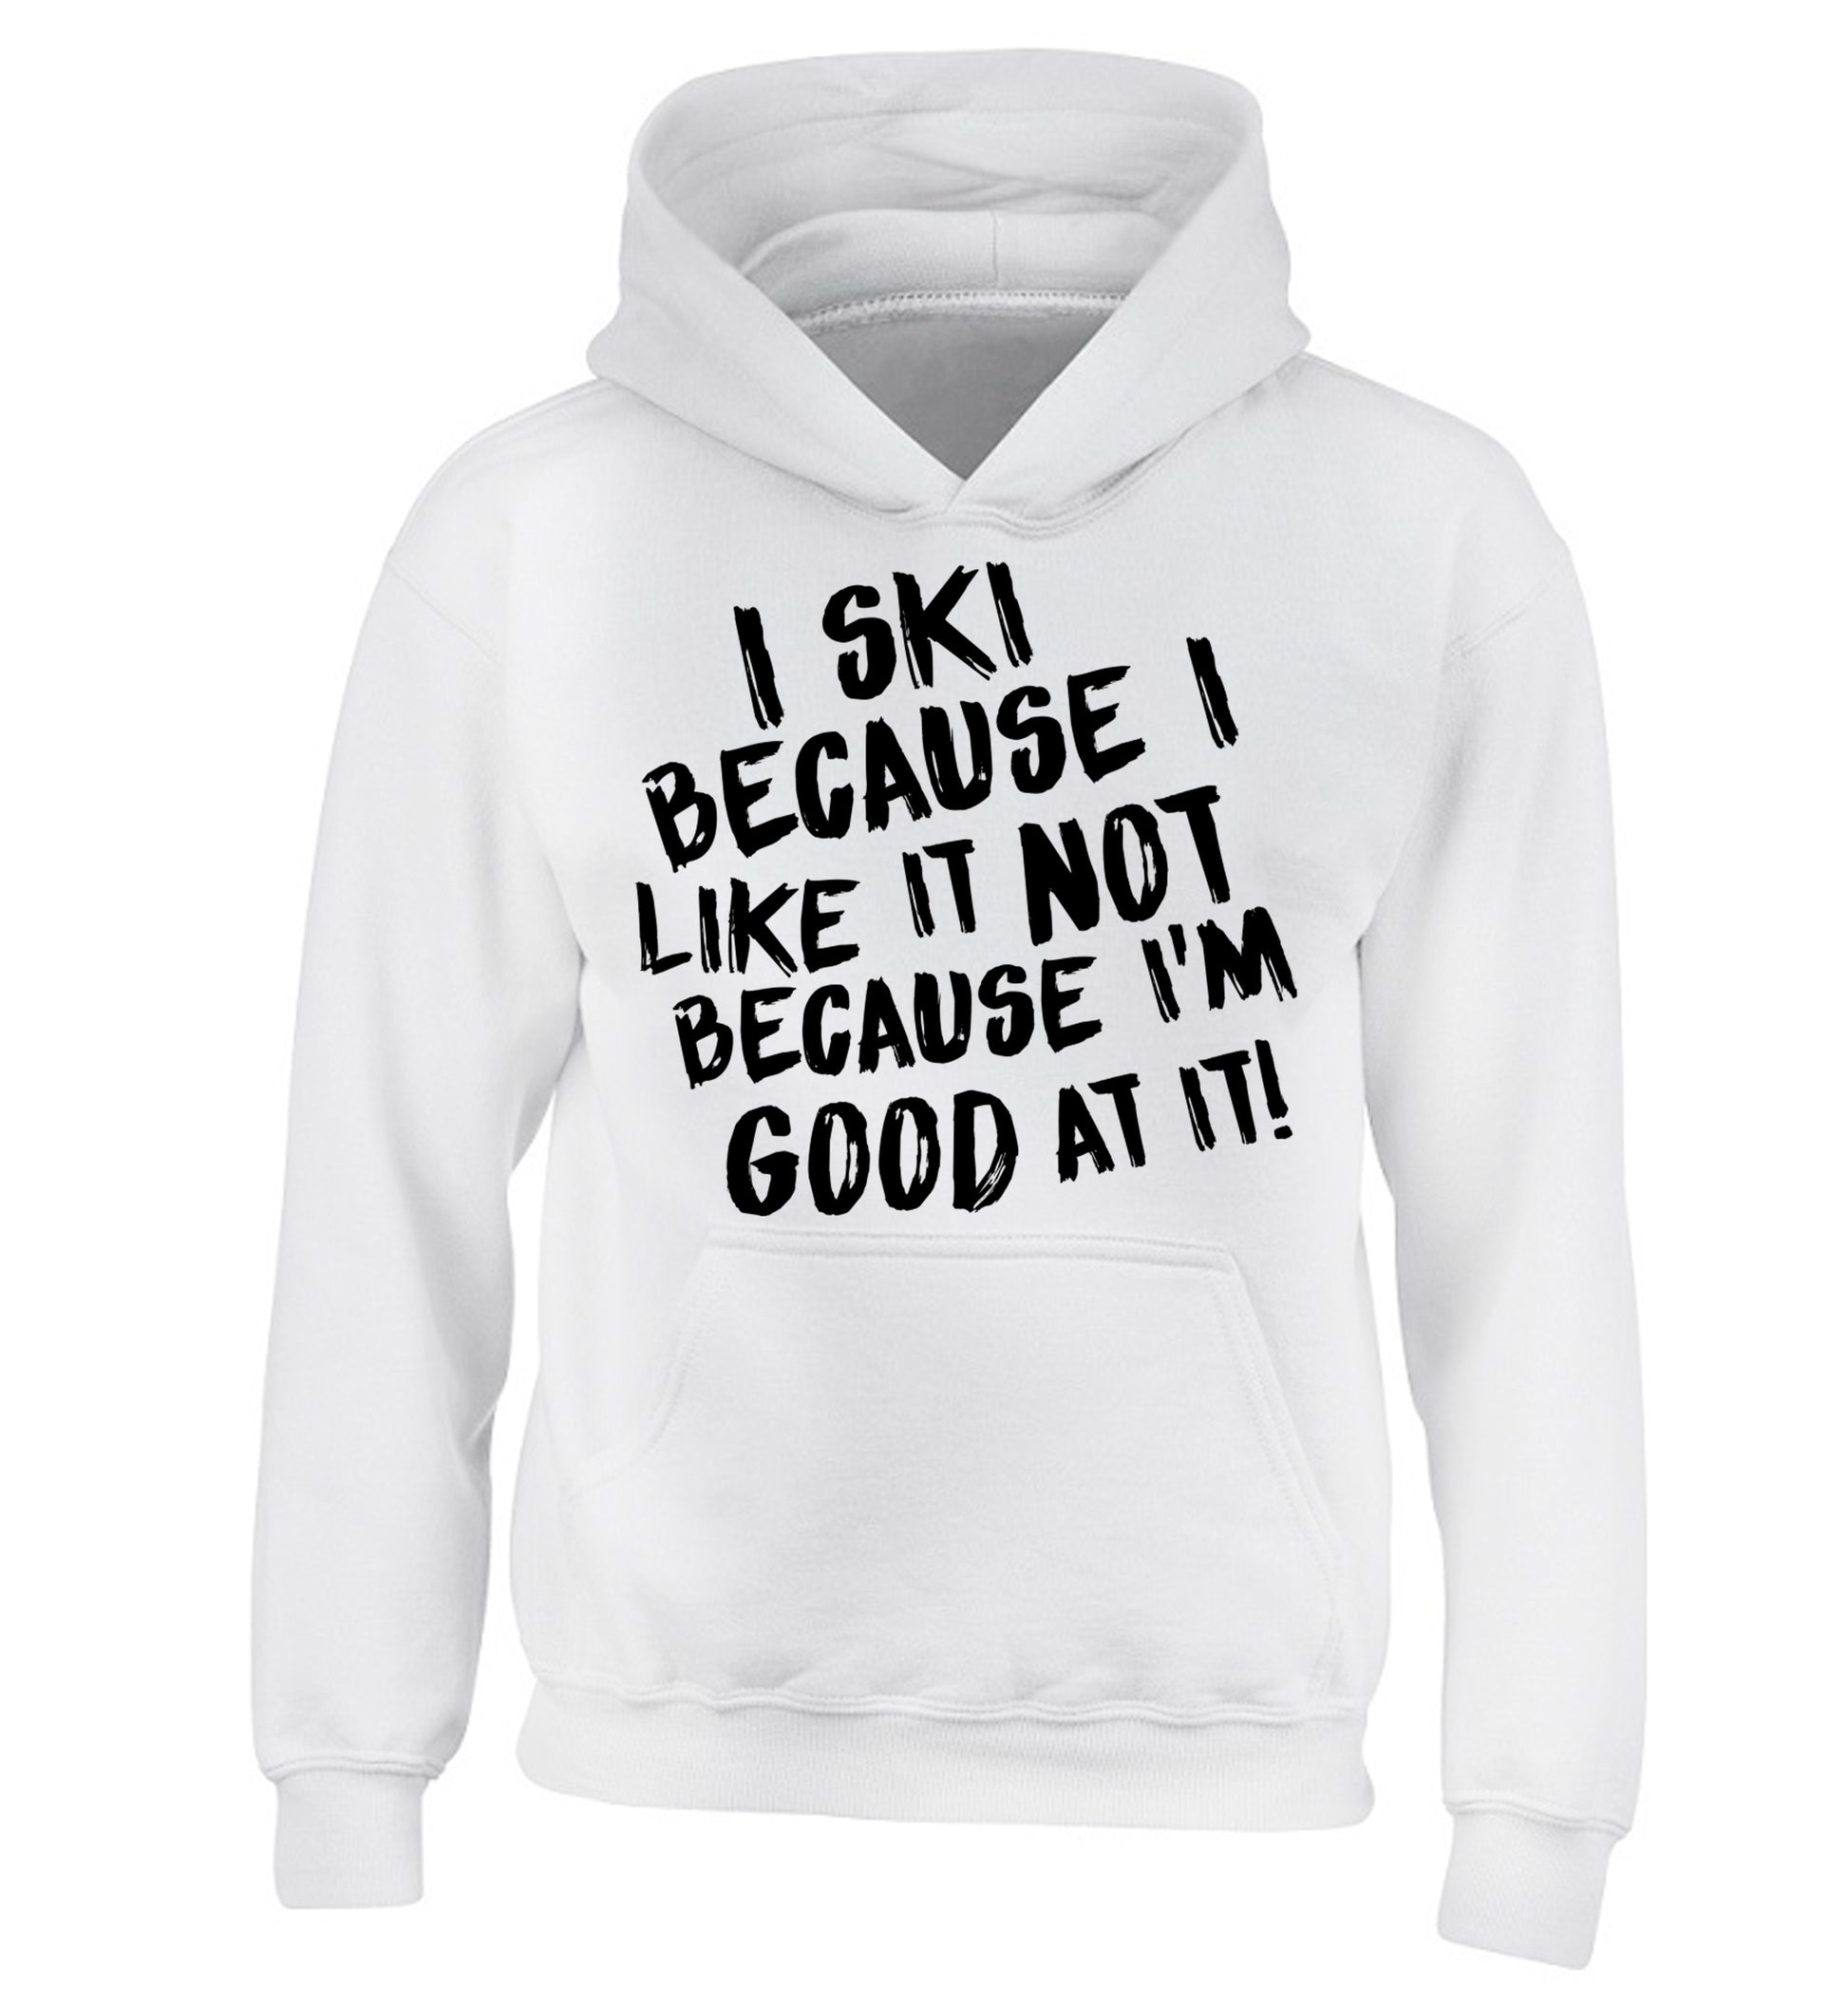 I ski because I like it not because I'm good at it children's white hoodie 12-14 Years